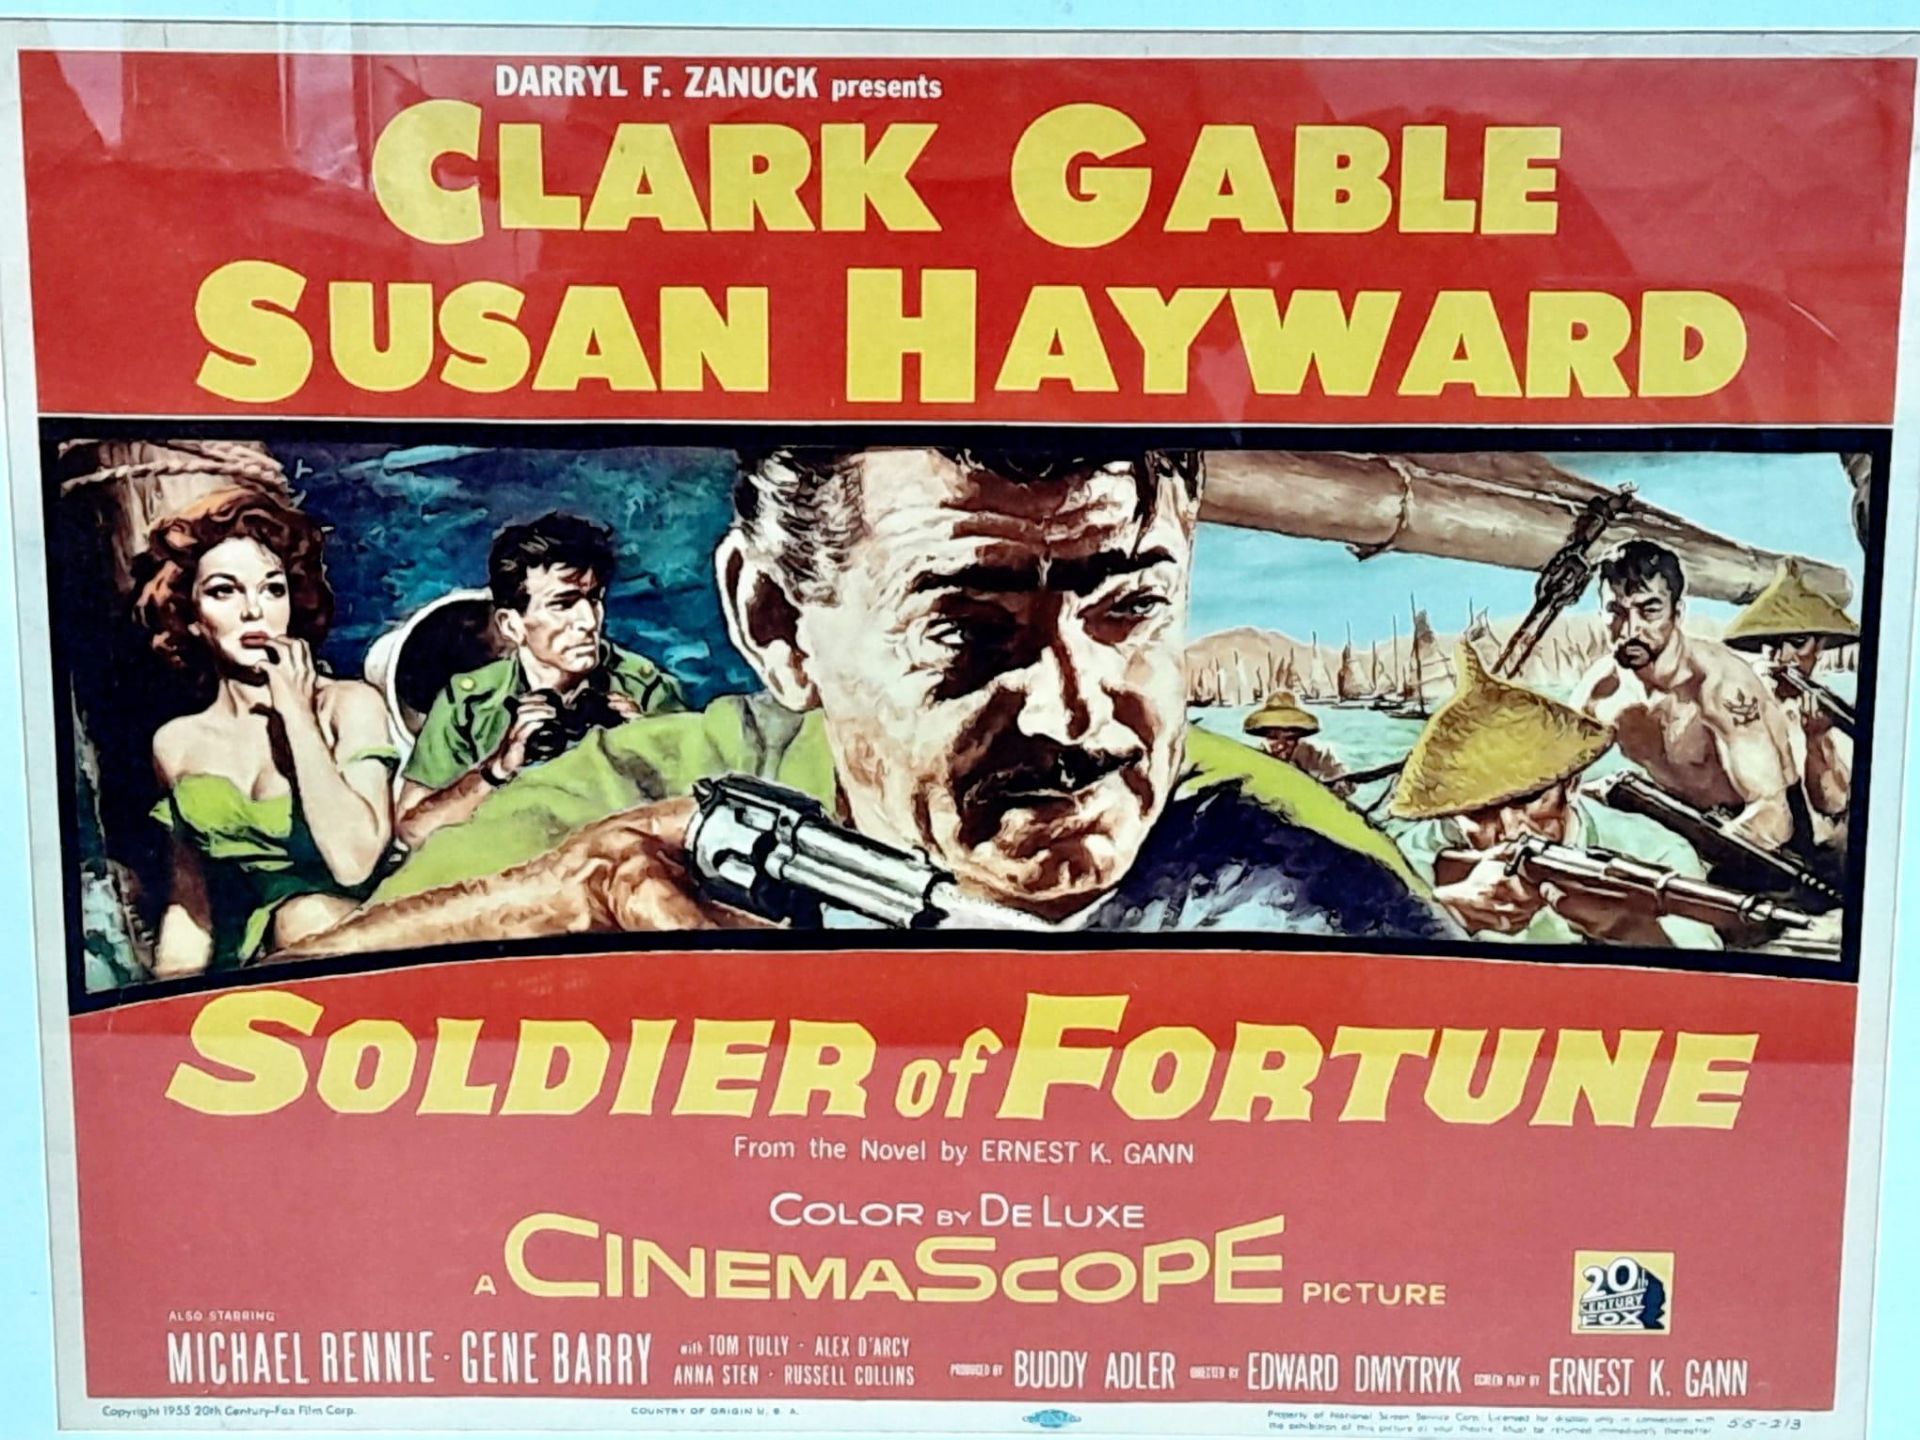 A FRAMED MOVIE POSTER FOR "SOLDIERS OF FORTUNE" STARRING CLARK GABLE AND SUSAN HAYWOOD .CIRCA 1955 . - Bild 2 aus 5